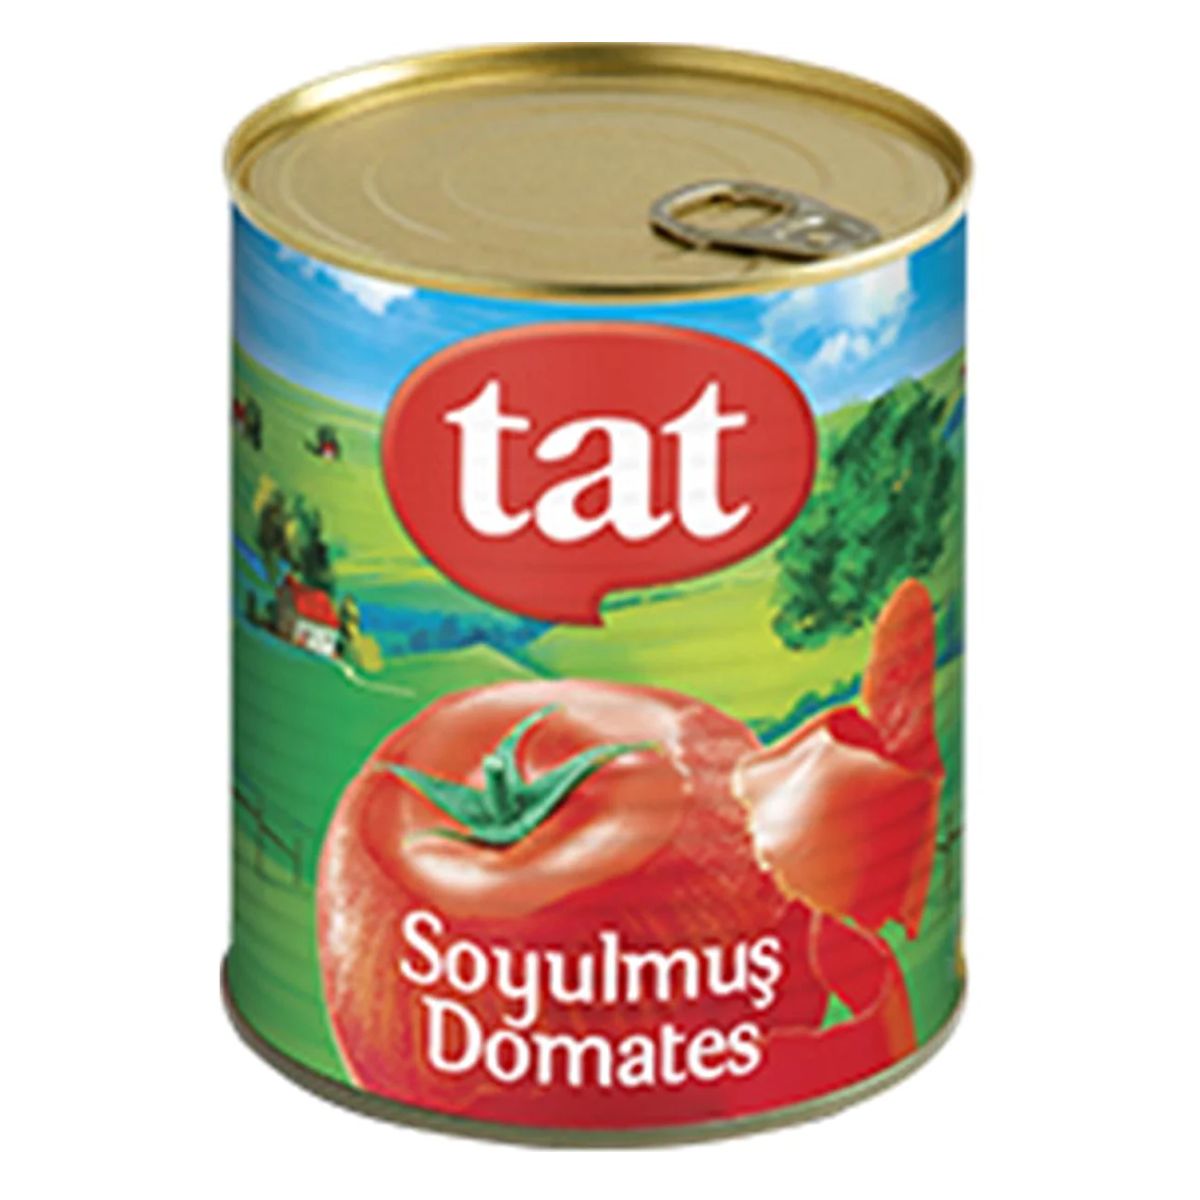 A can of Tat - Peeled Tomatoes - 800g.